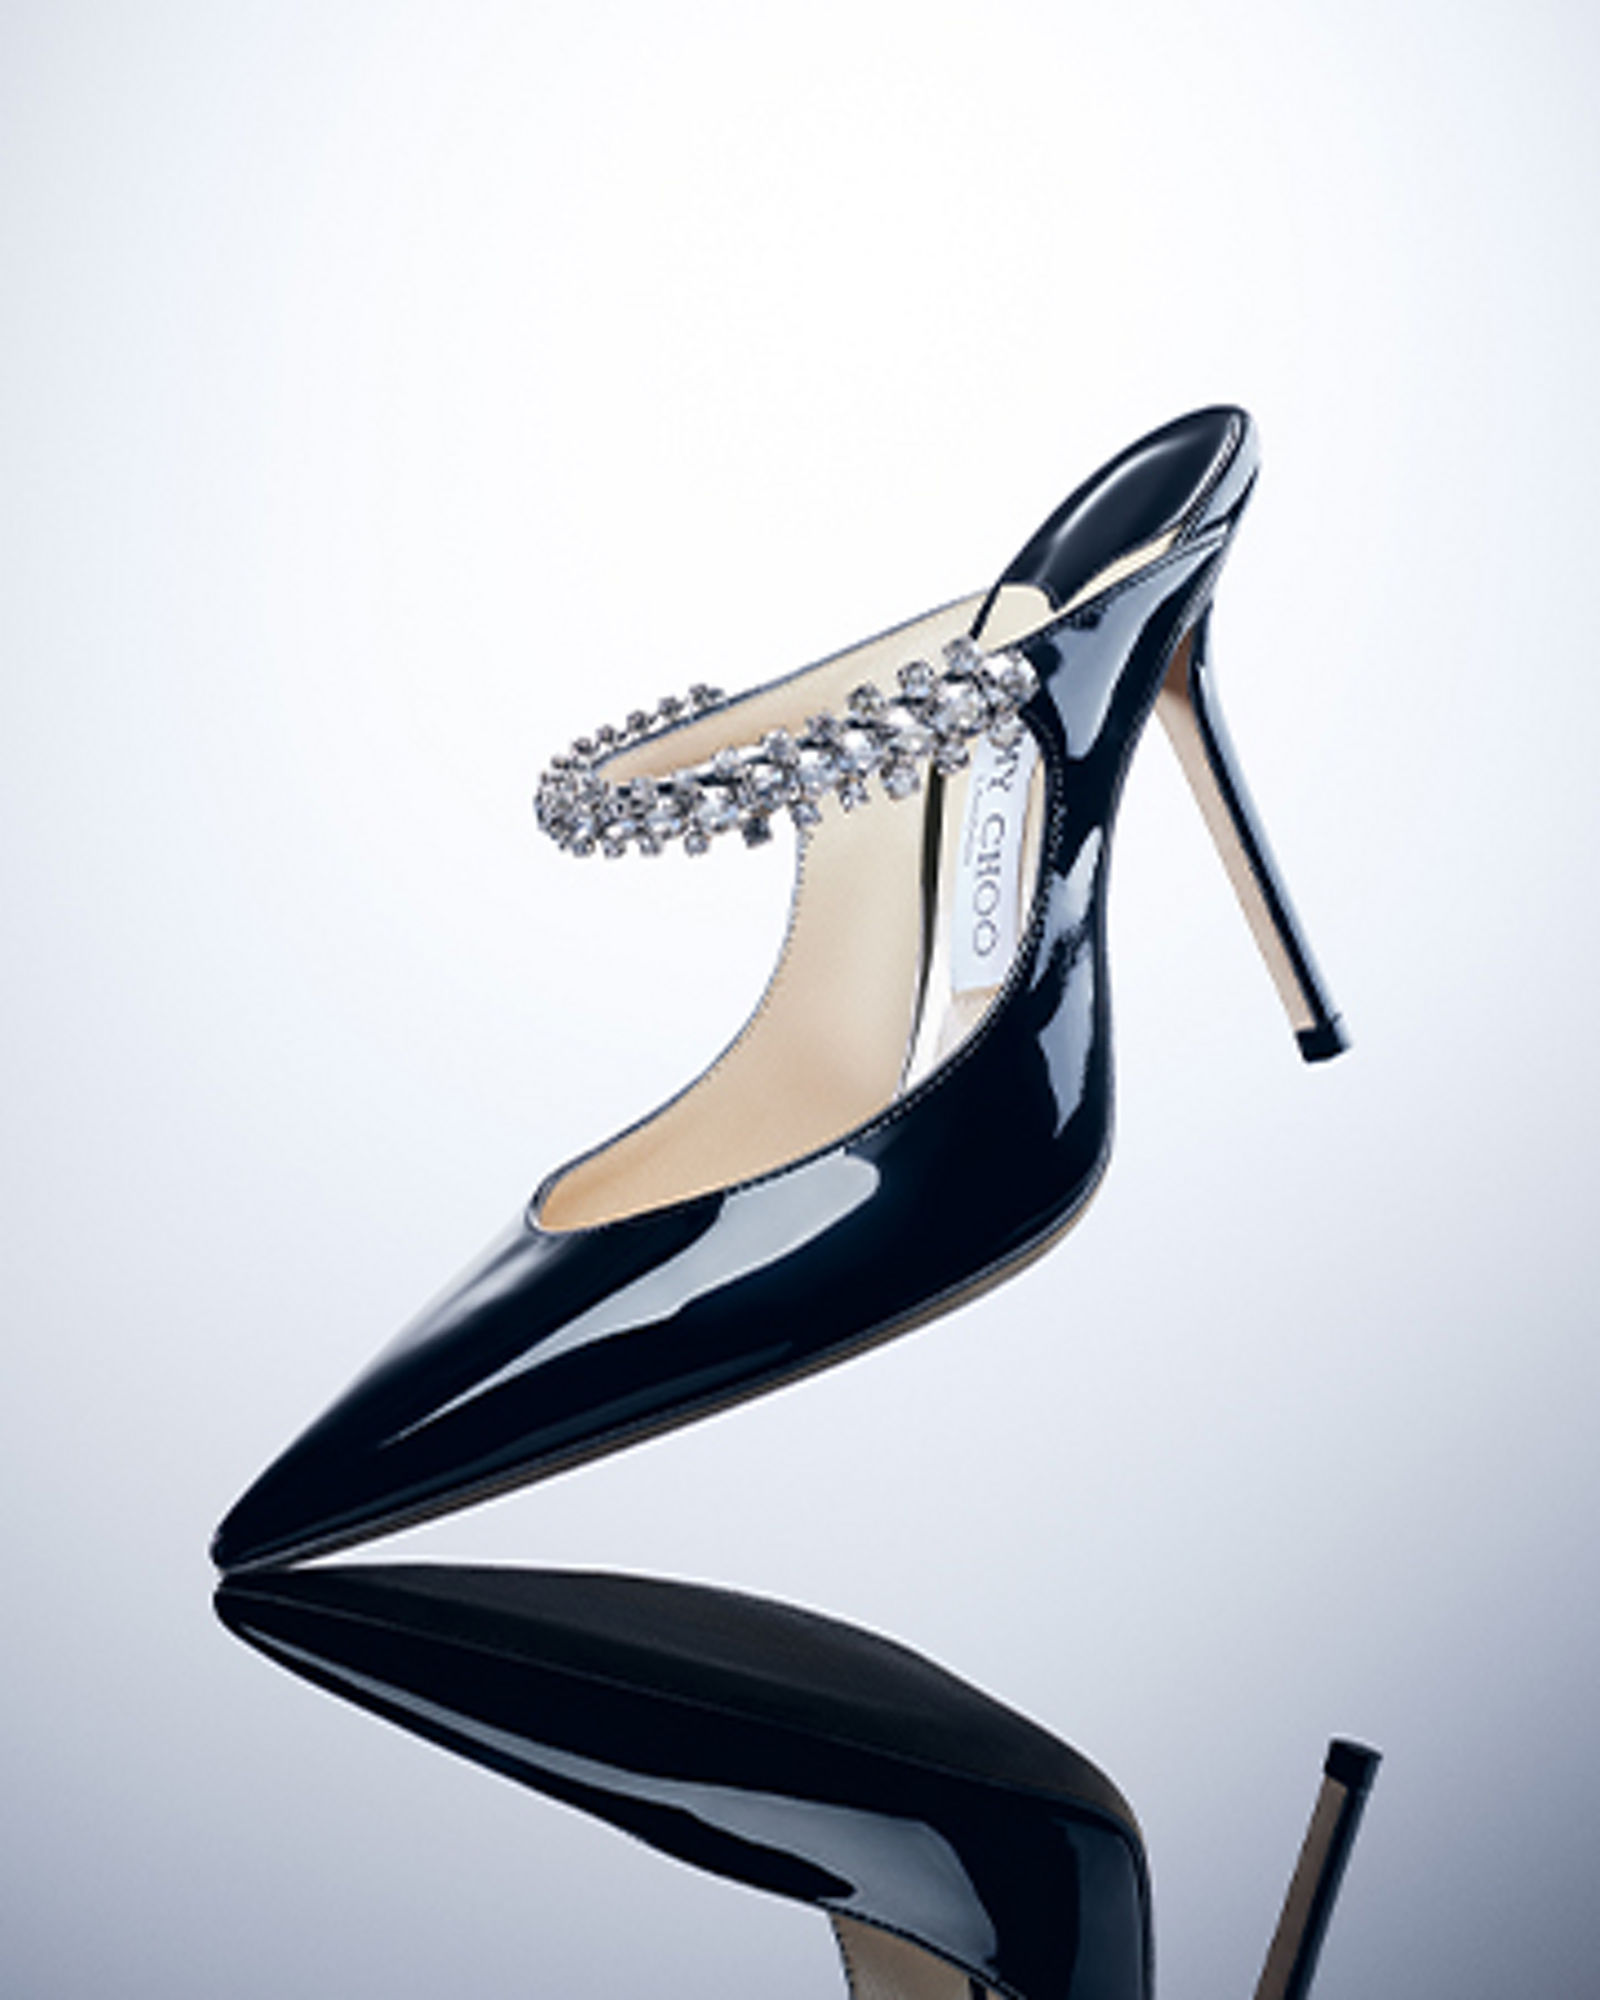 JIMMY CHOO - Jimmy Choo has come up with a beautiful